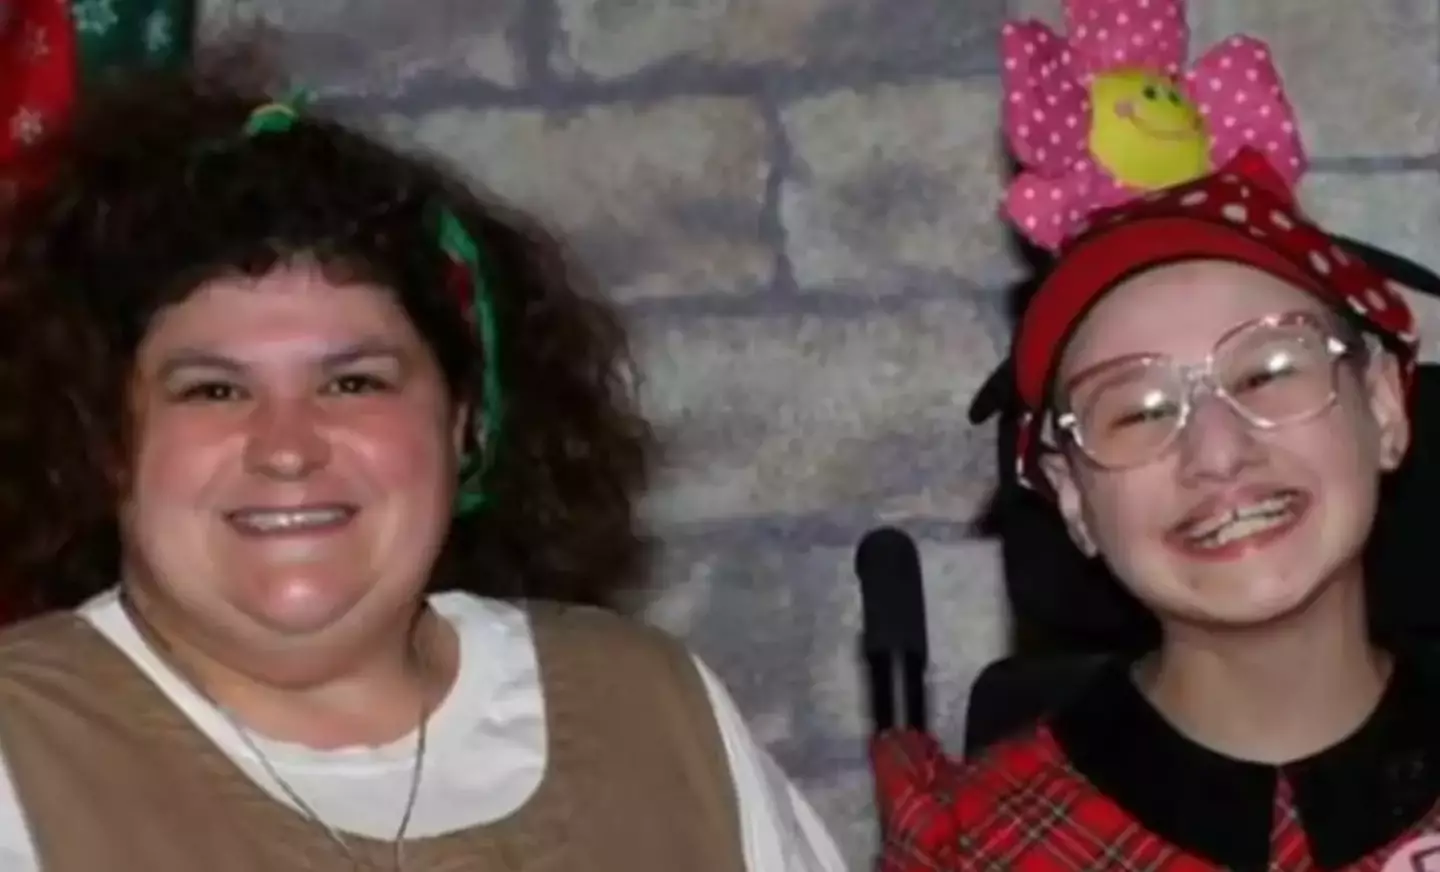 Gypsy Rose Blanchard said her mom pretended she was terminally ill.